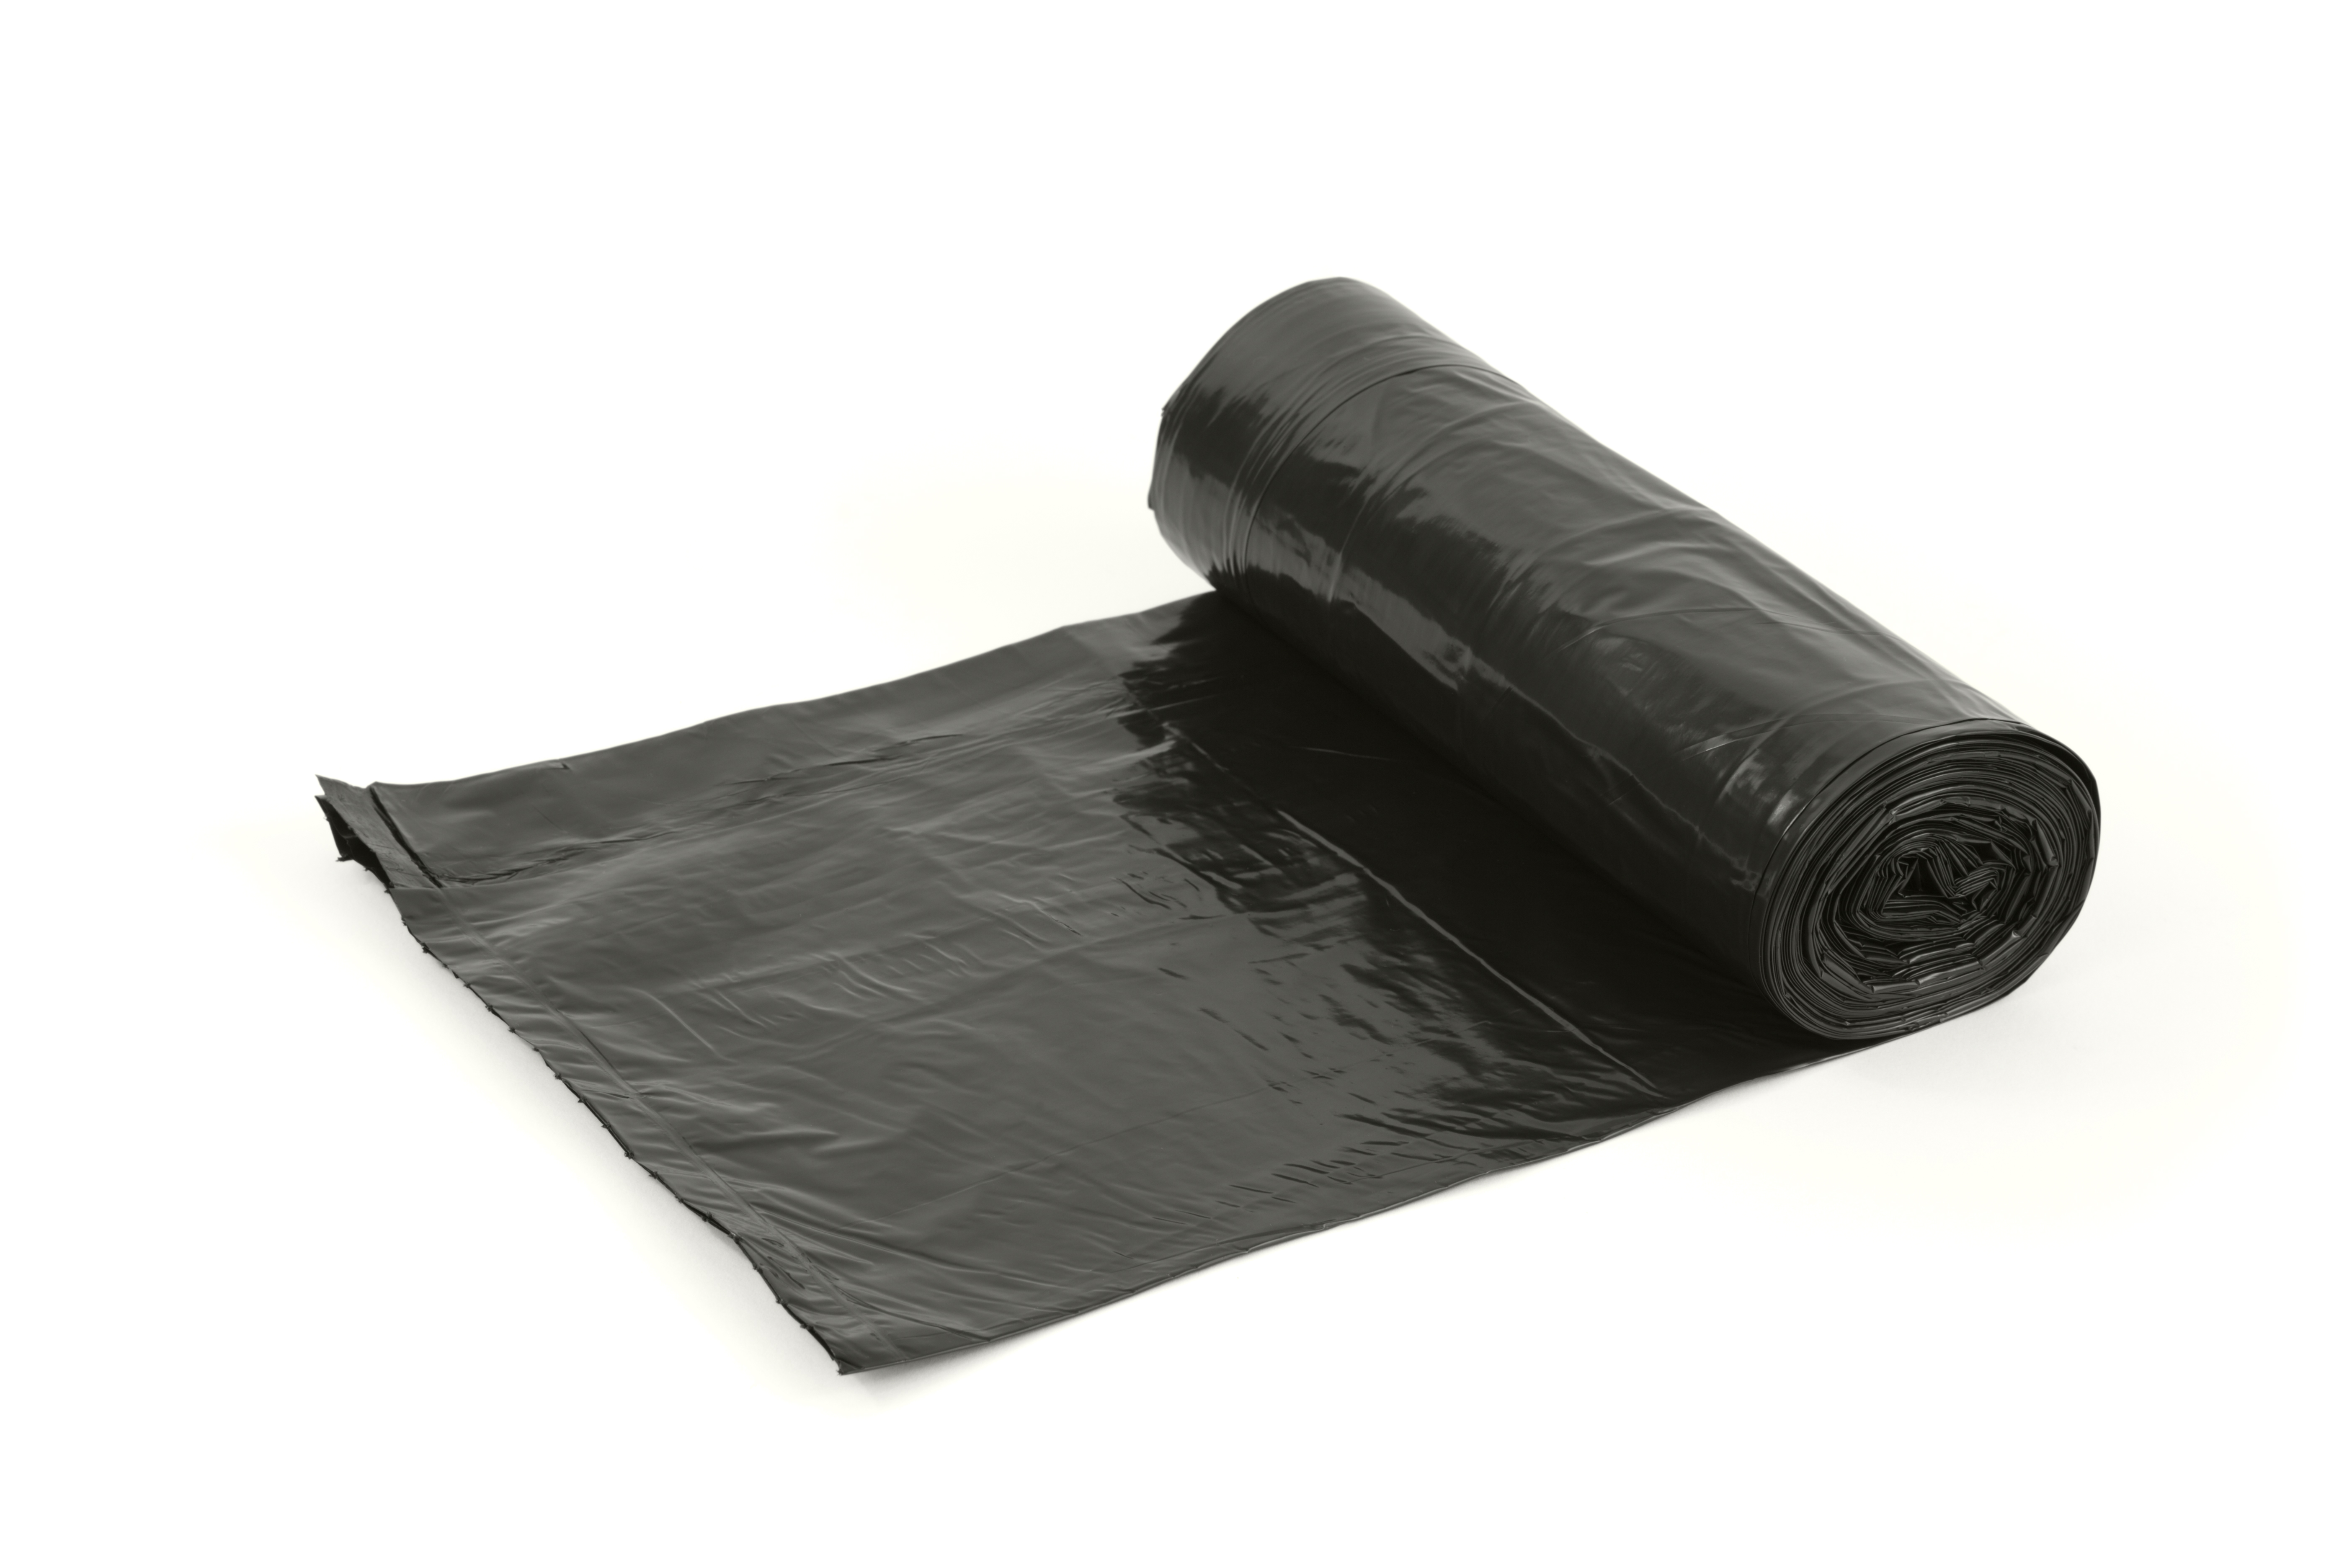 Does Wearing A Garbage Bag While Working Out Help You Lose Weight?